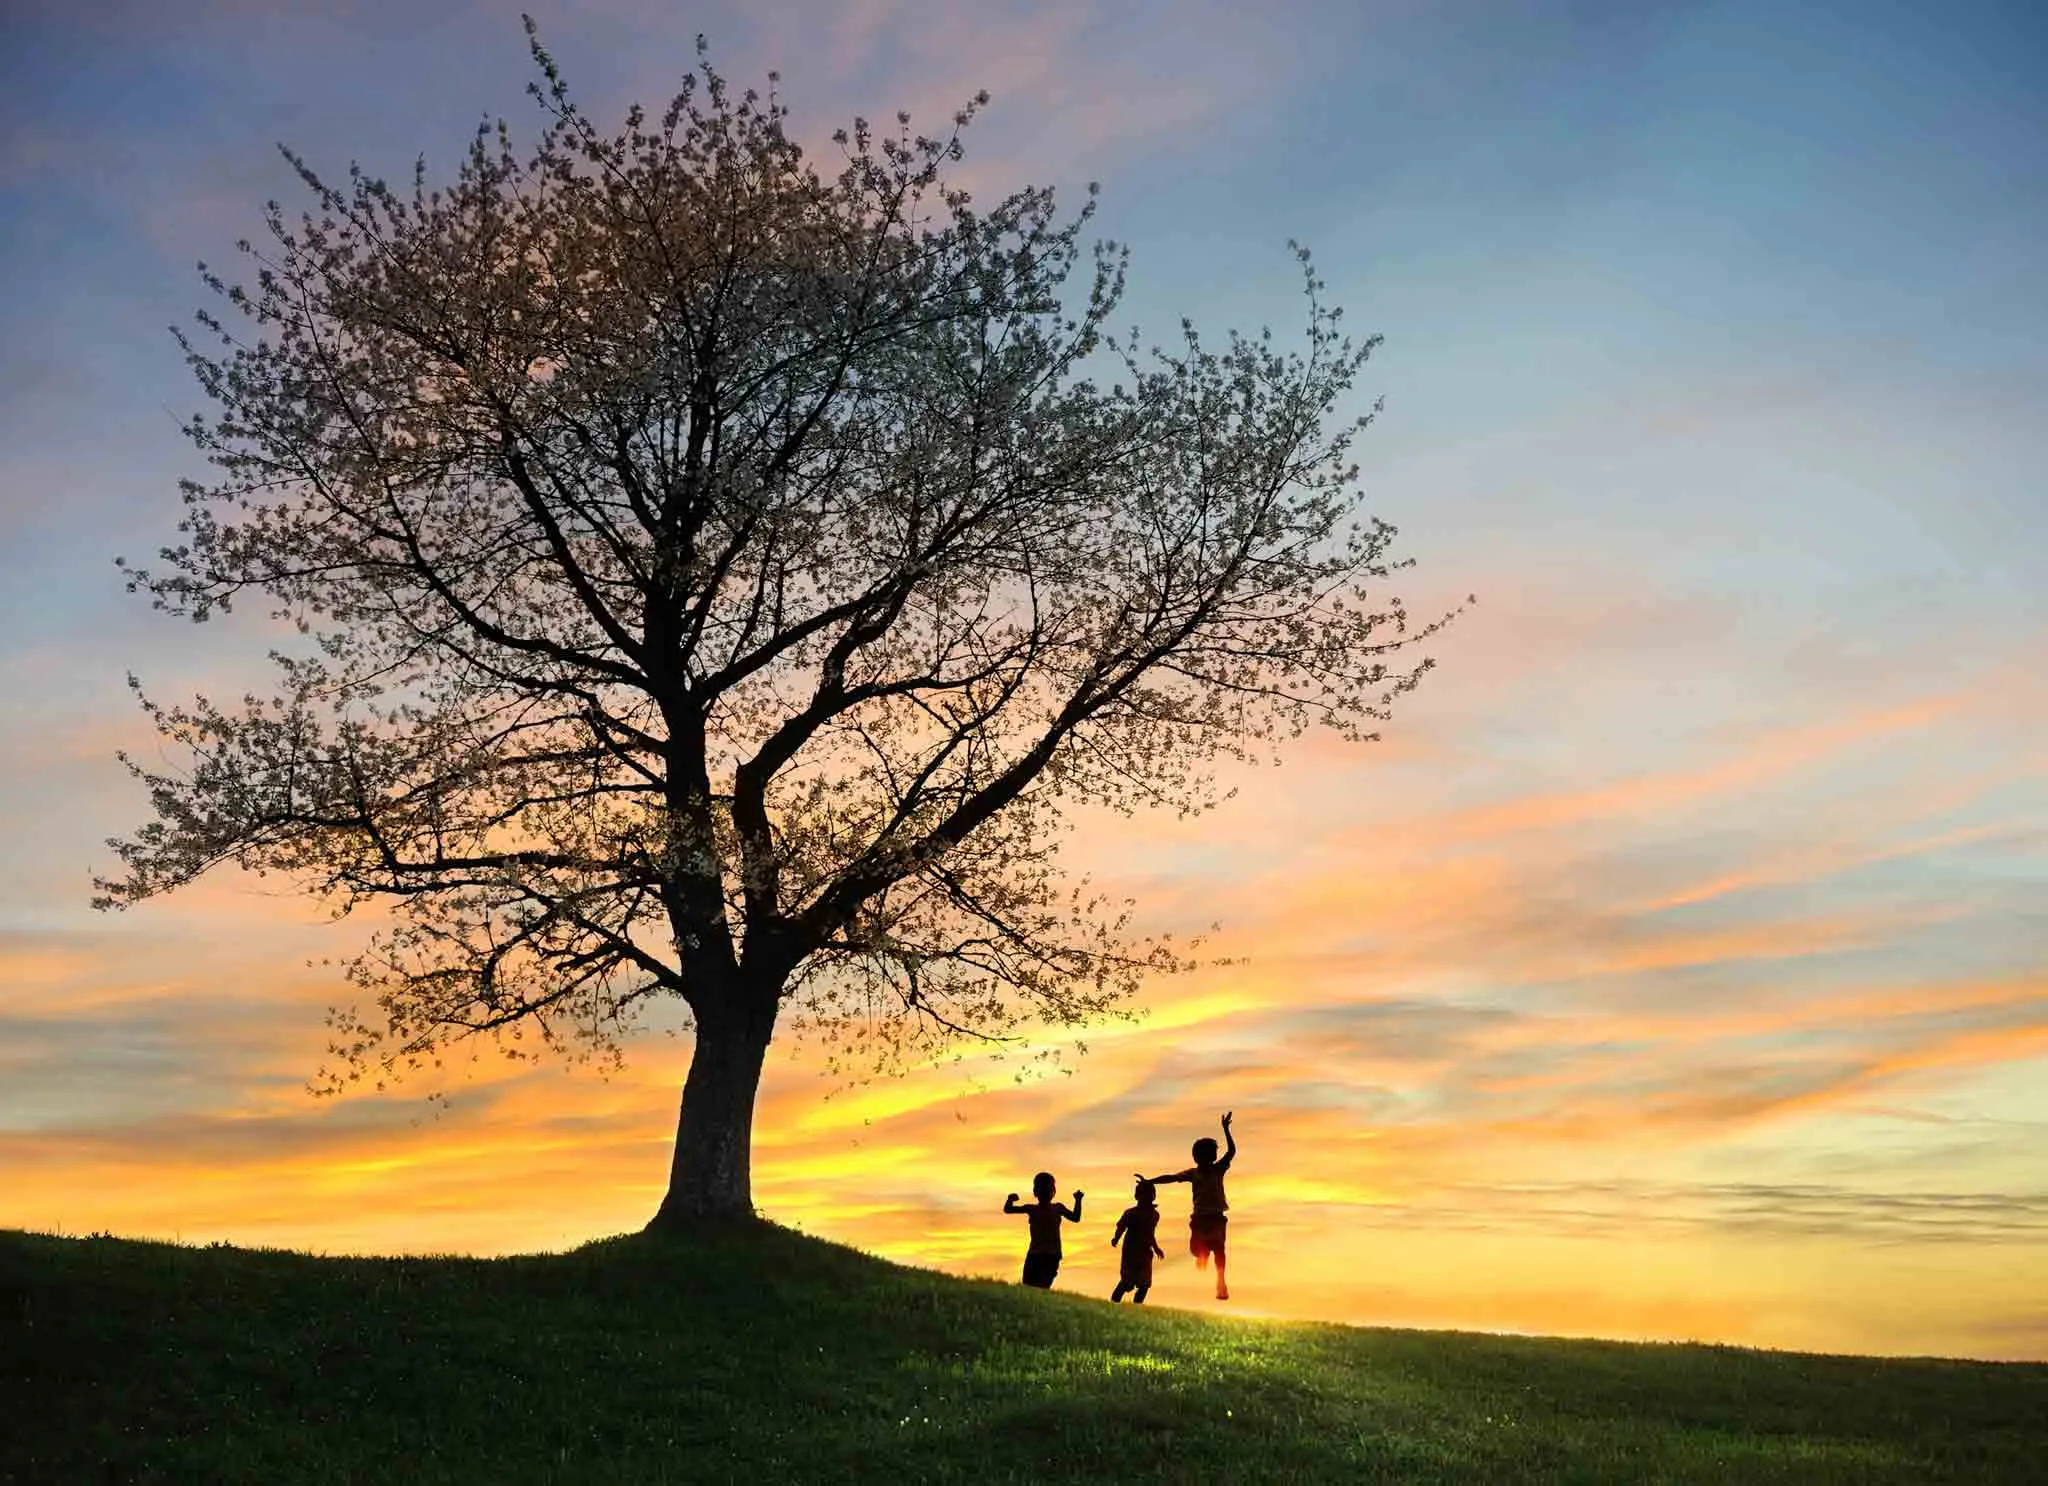 Silhouette of three children playing under a tree at sunset.